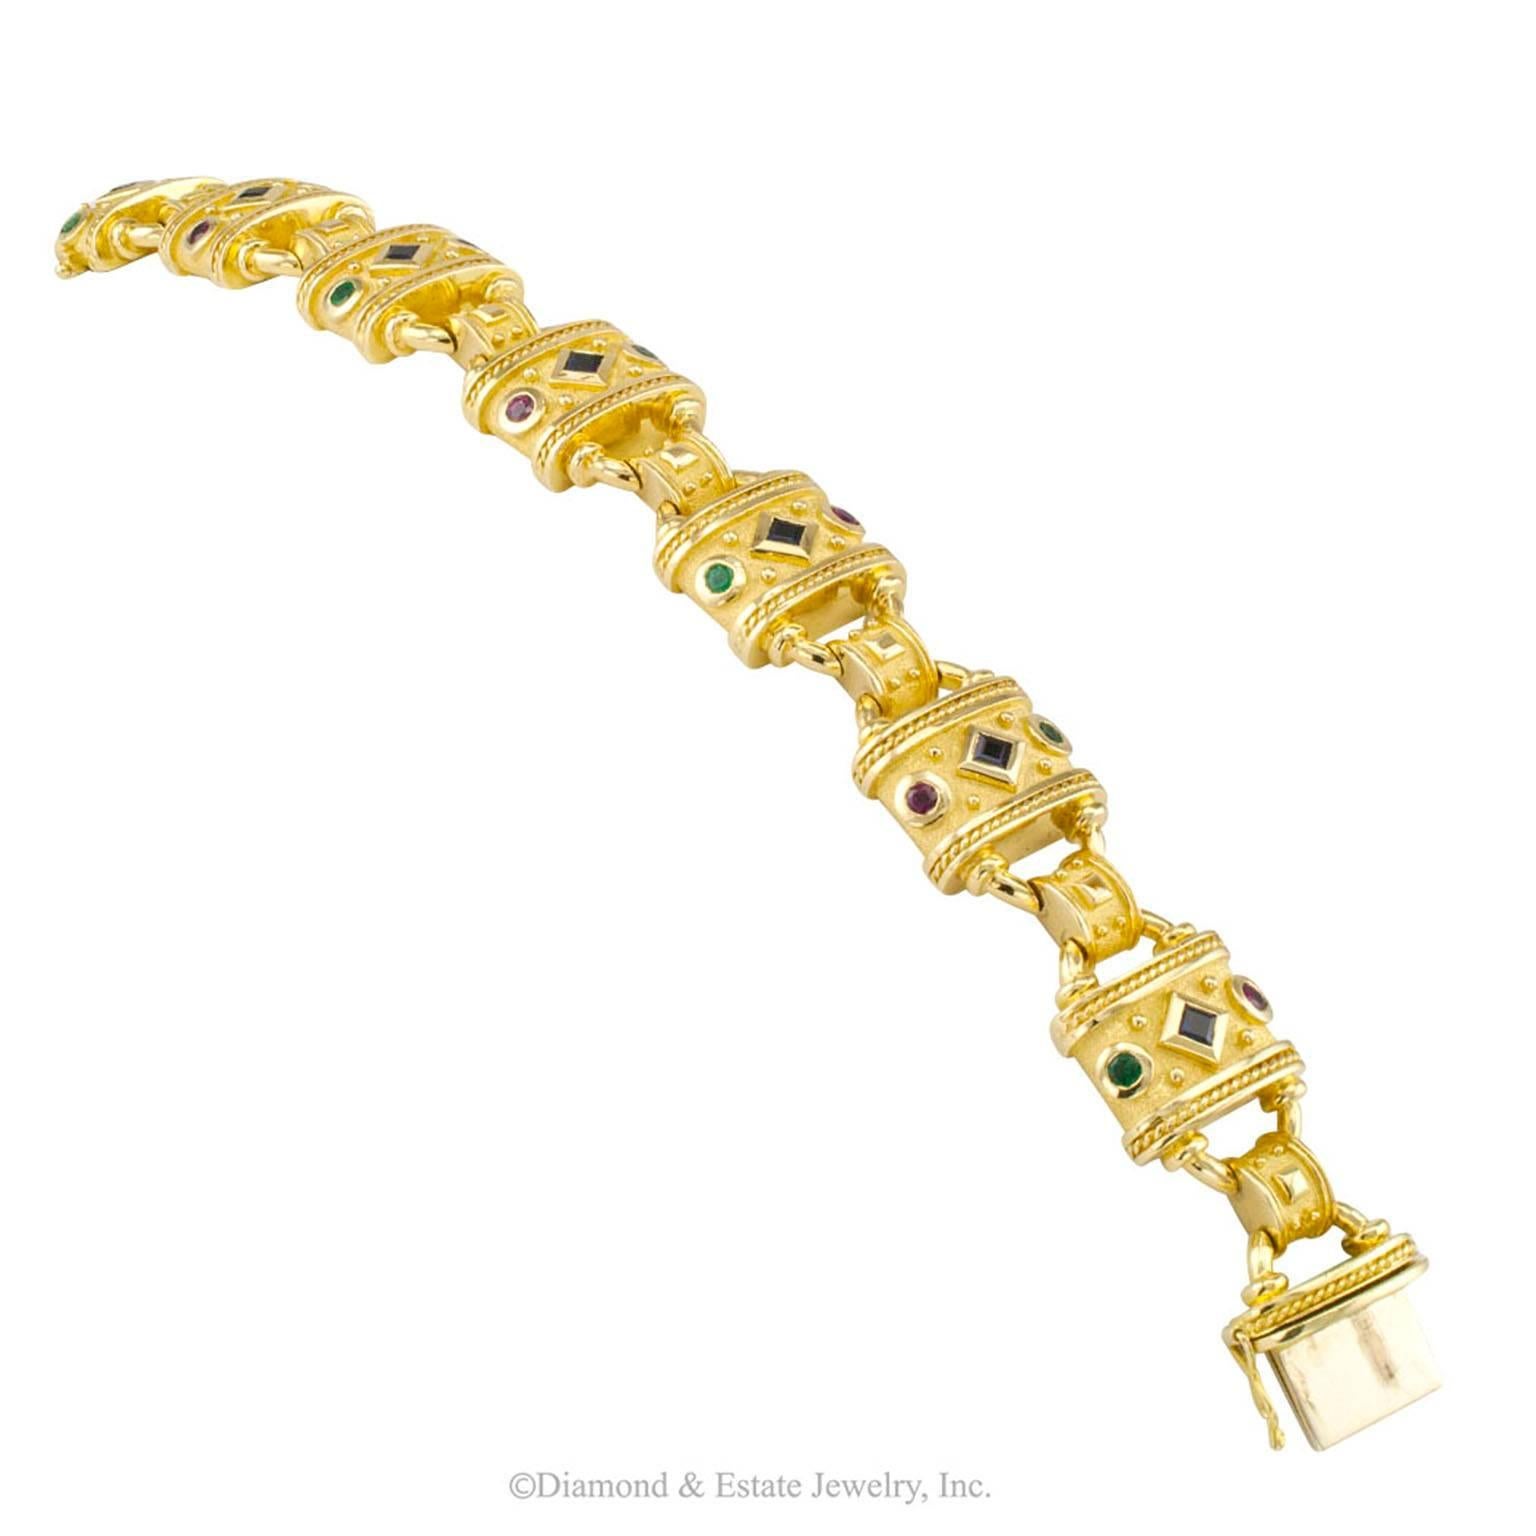 Millennial Greek Gold Bracelet Emerald Ruby Sapphire

Millennial Greek gold link bracelet set with emeralds rubies and sapphires circa 2000.  Attractive and chunky, the padlock like links and connectors integrate sturdy fabrication and attention to